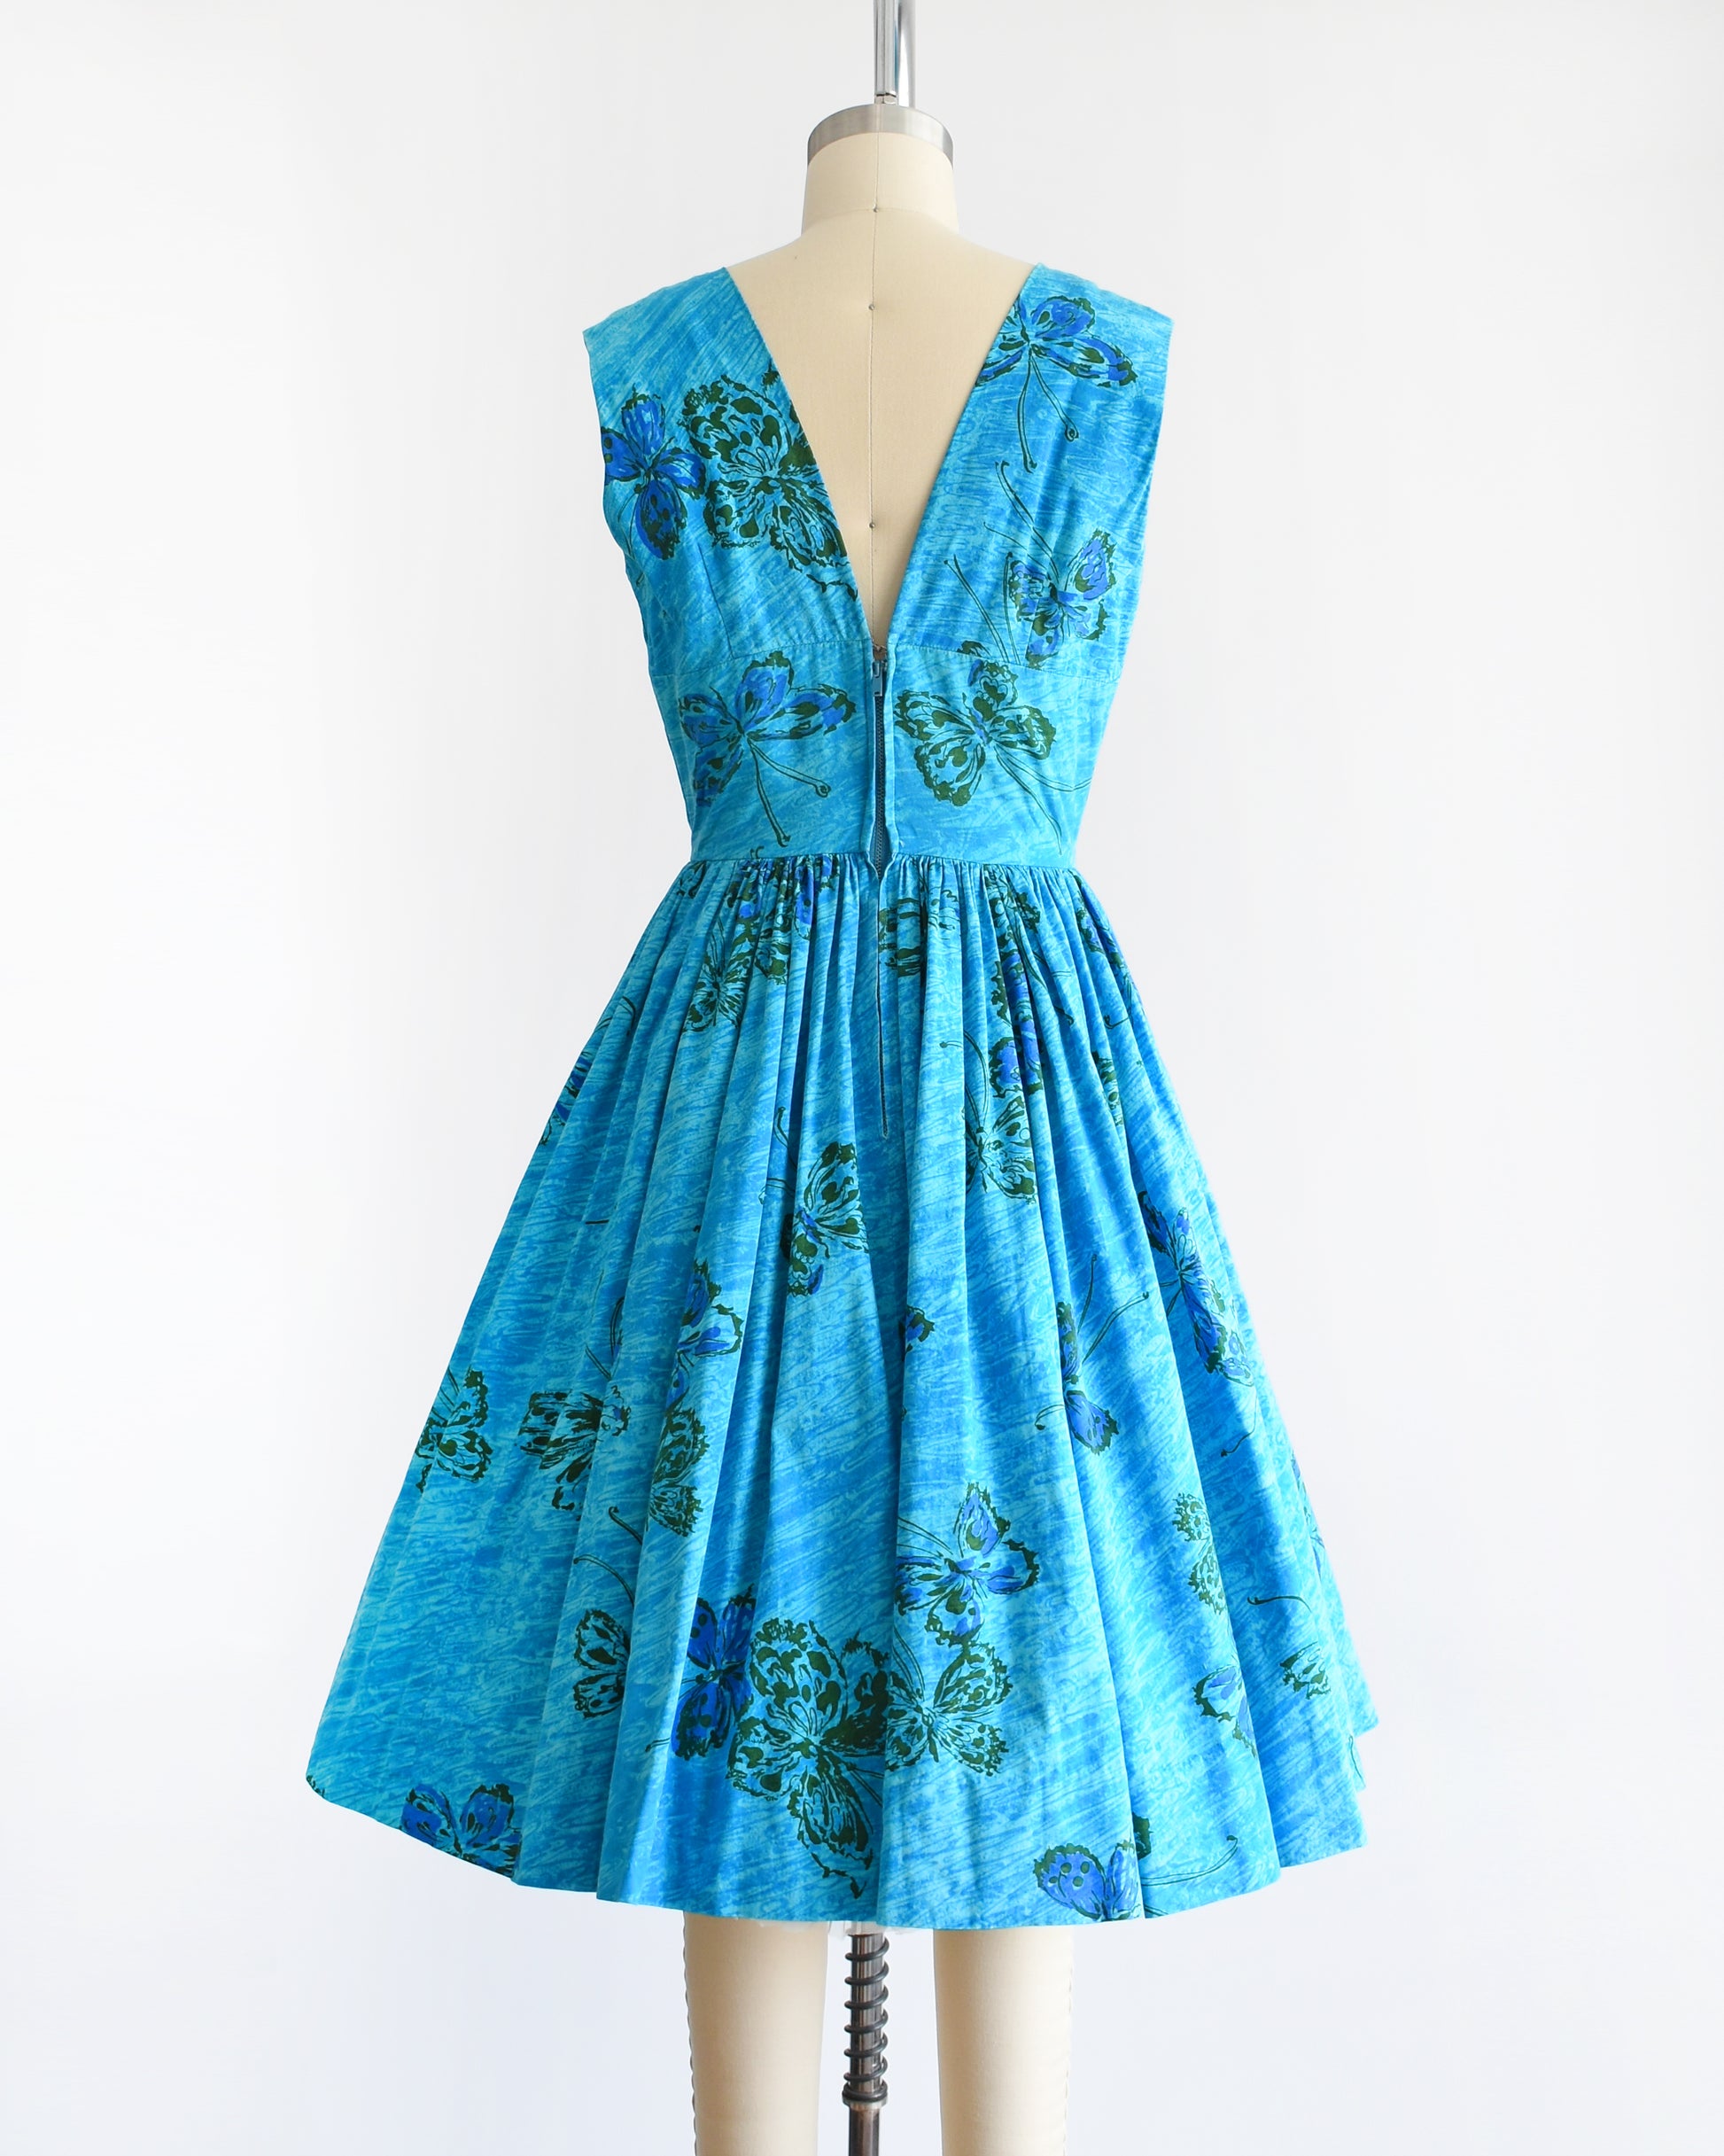 Back view of a vintage 1950s Anne Fogarty blue fit and flare dress that has a butterfly print. The dress is on a dress form.